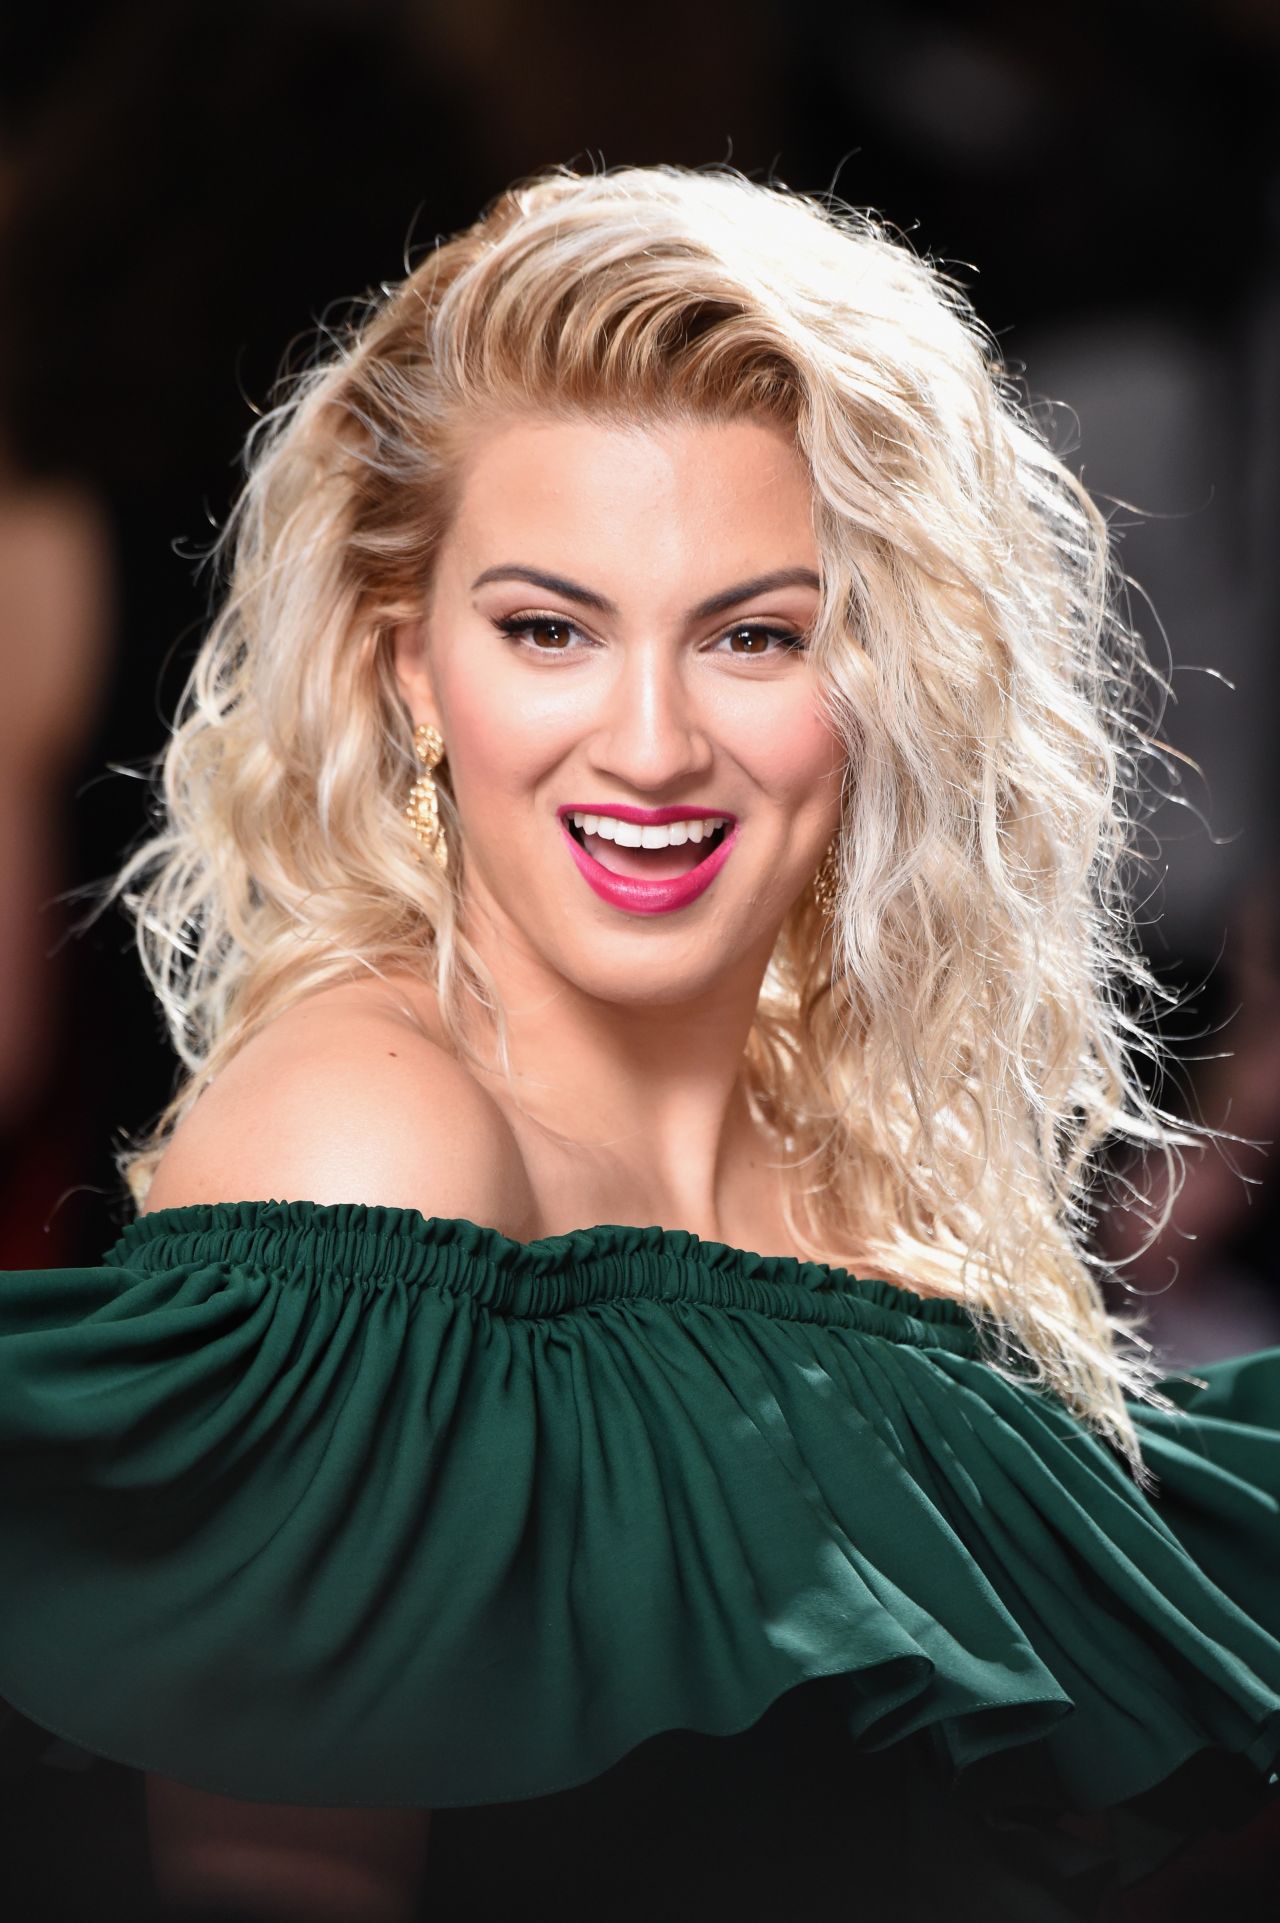 Tori Kelly on Red Carpet – GRAMMY Awards in Los Angeles 2/12/ 2017